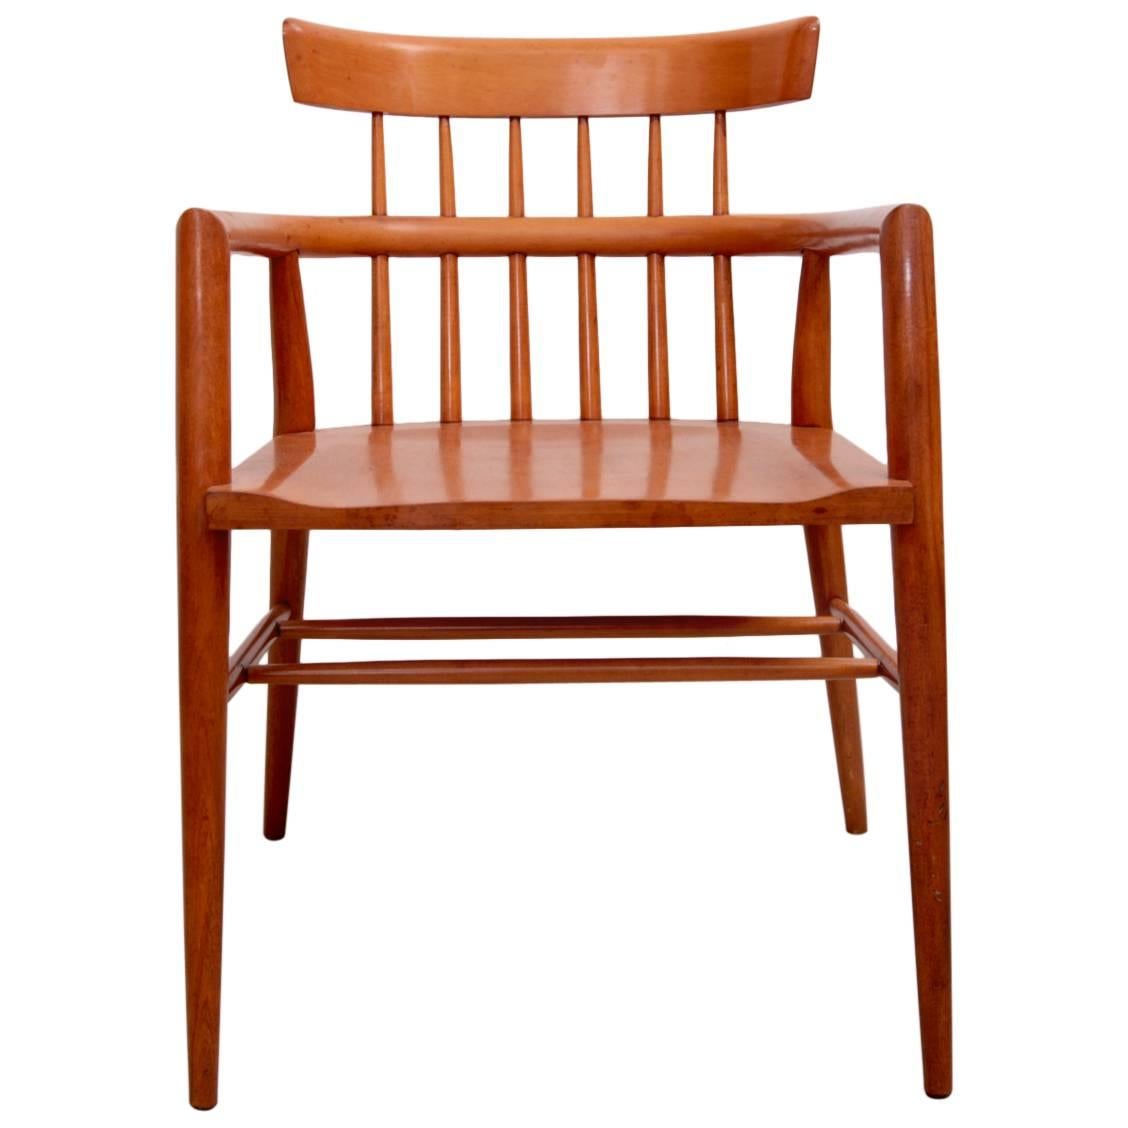 Solid Maple "Planner Group" Paul McCobb Armchair for Winchendon